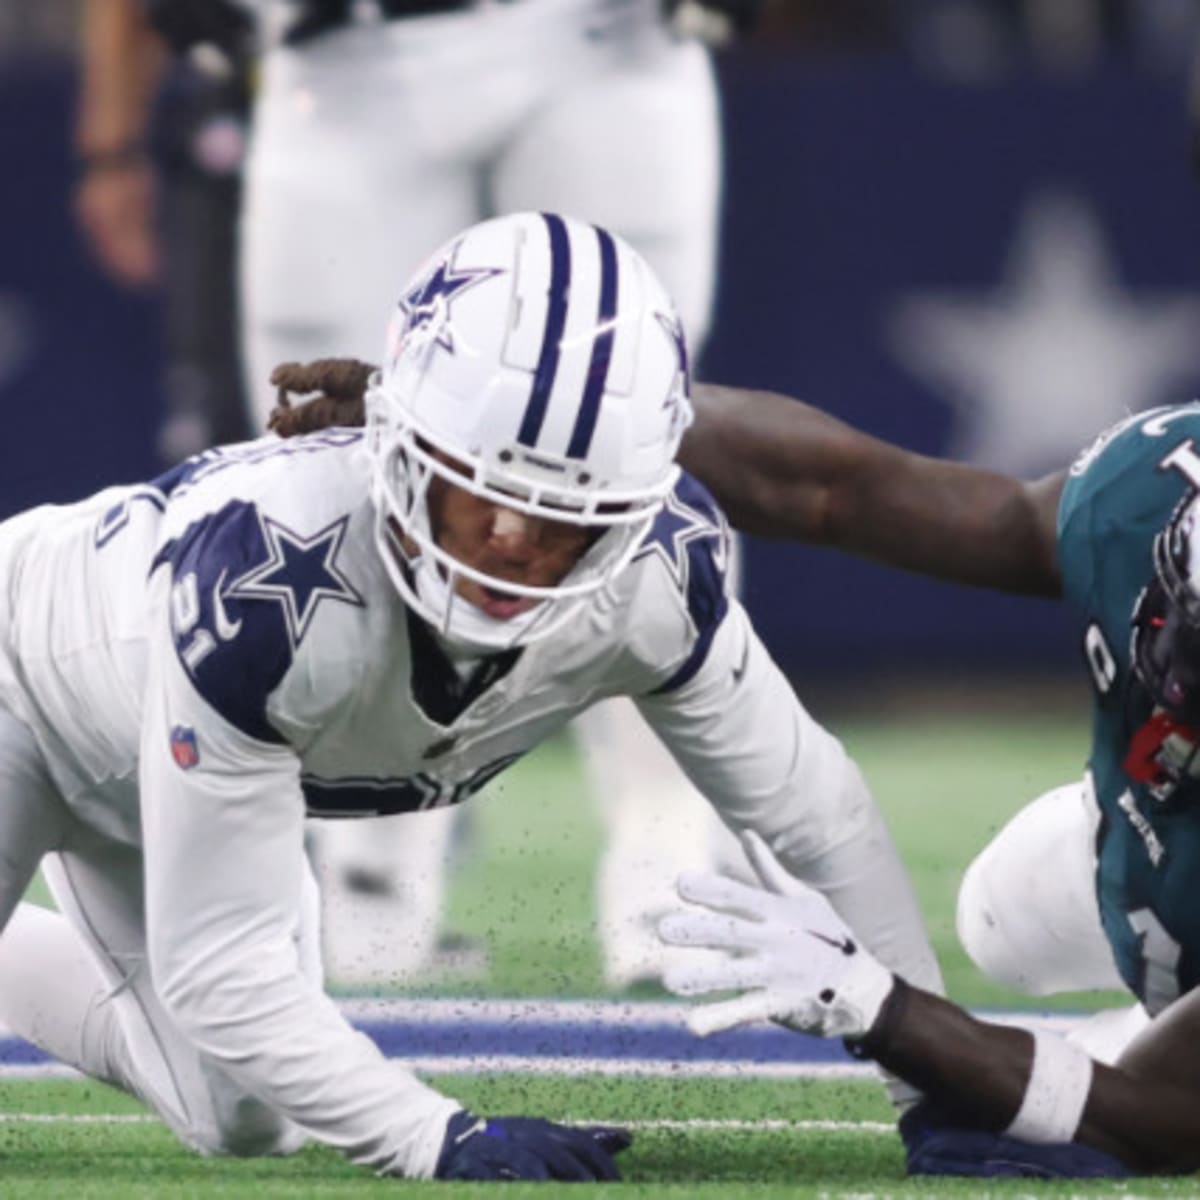 Doomsday Return? Dallas Cowboys Defense 'Wanted to Put Out a Statement at  Home!' vs. Philadelphia Eagles